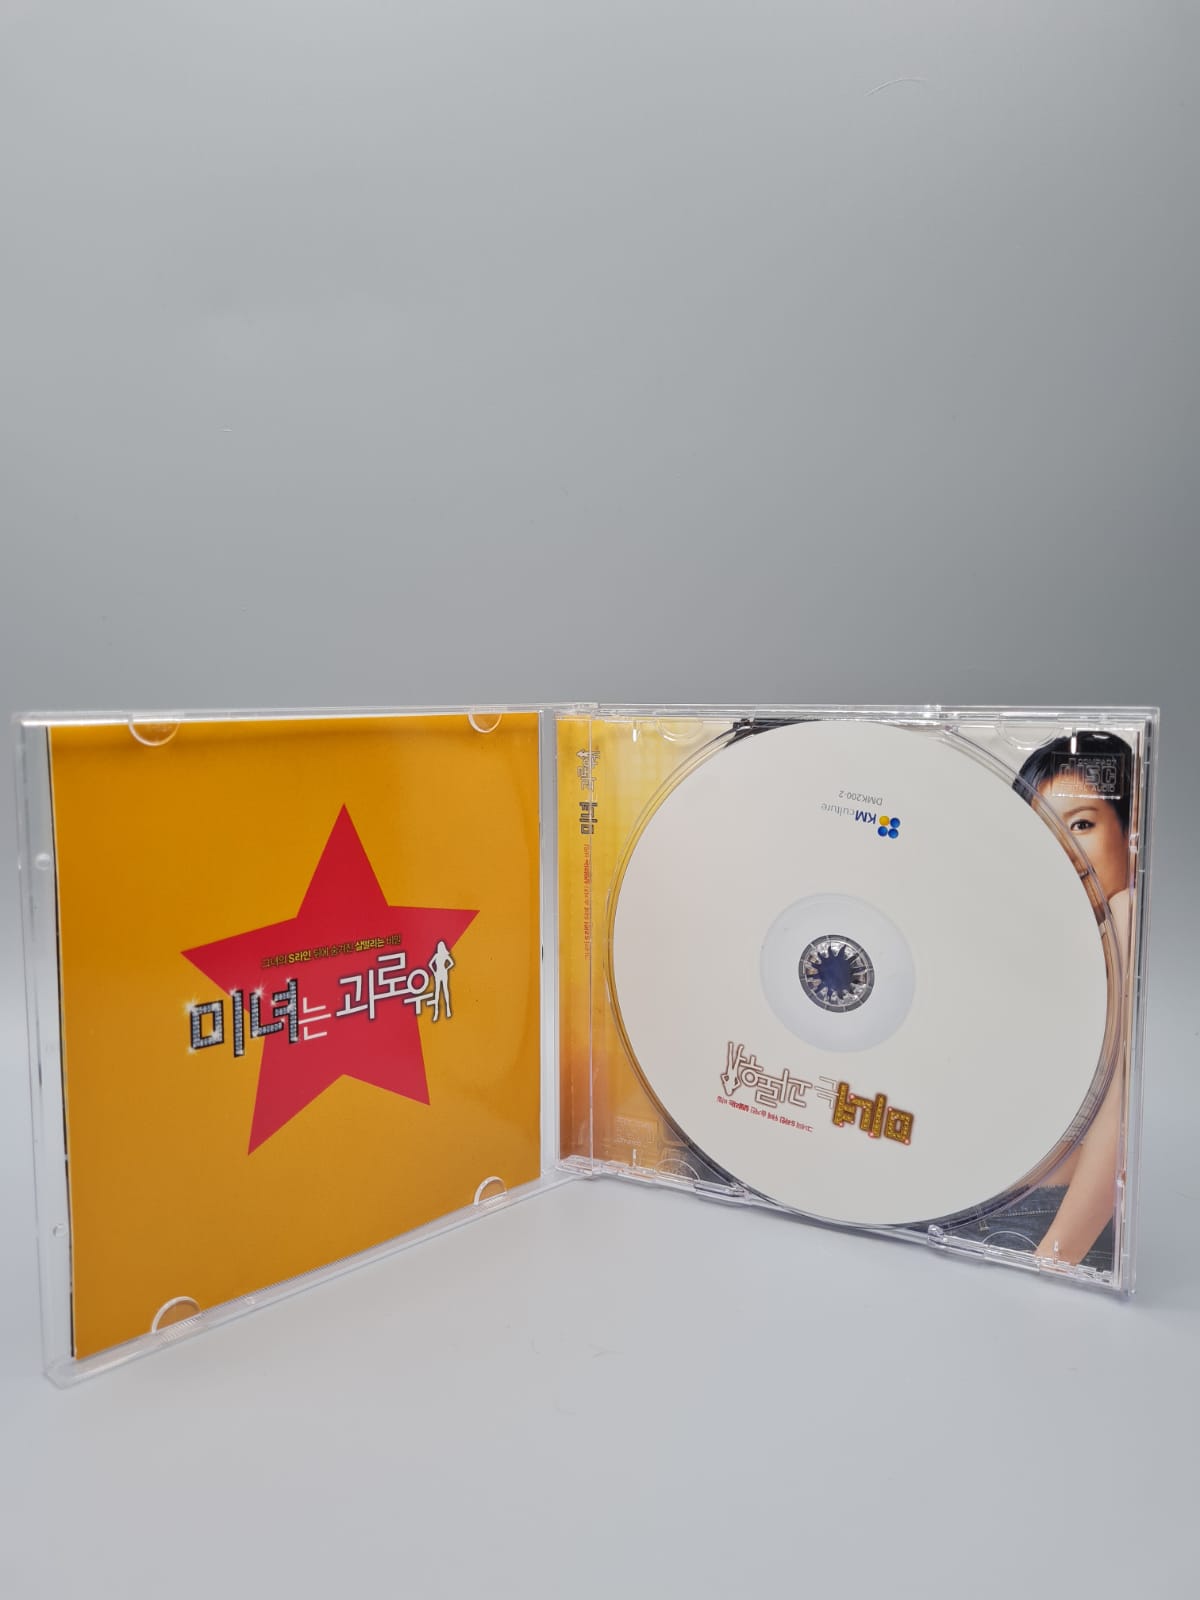 200 Pounds Beauty Korean Movie DVD + OST 3Disc Special Limited Edition English Subtitle Kim Ah Joong Joo Jin Mo